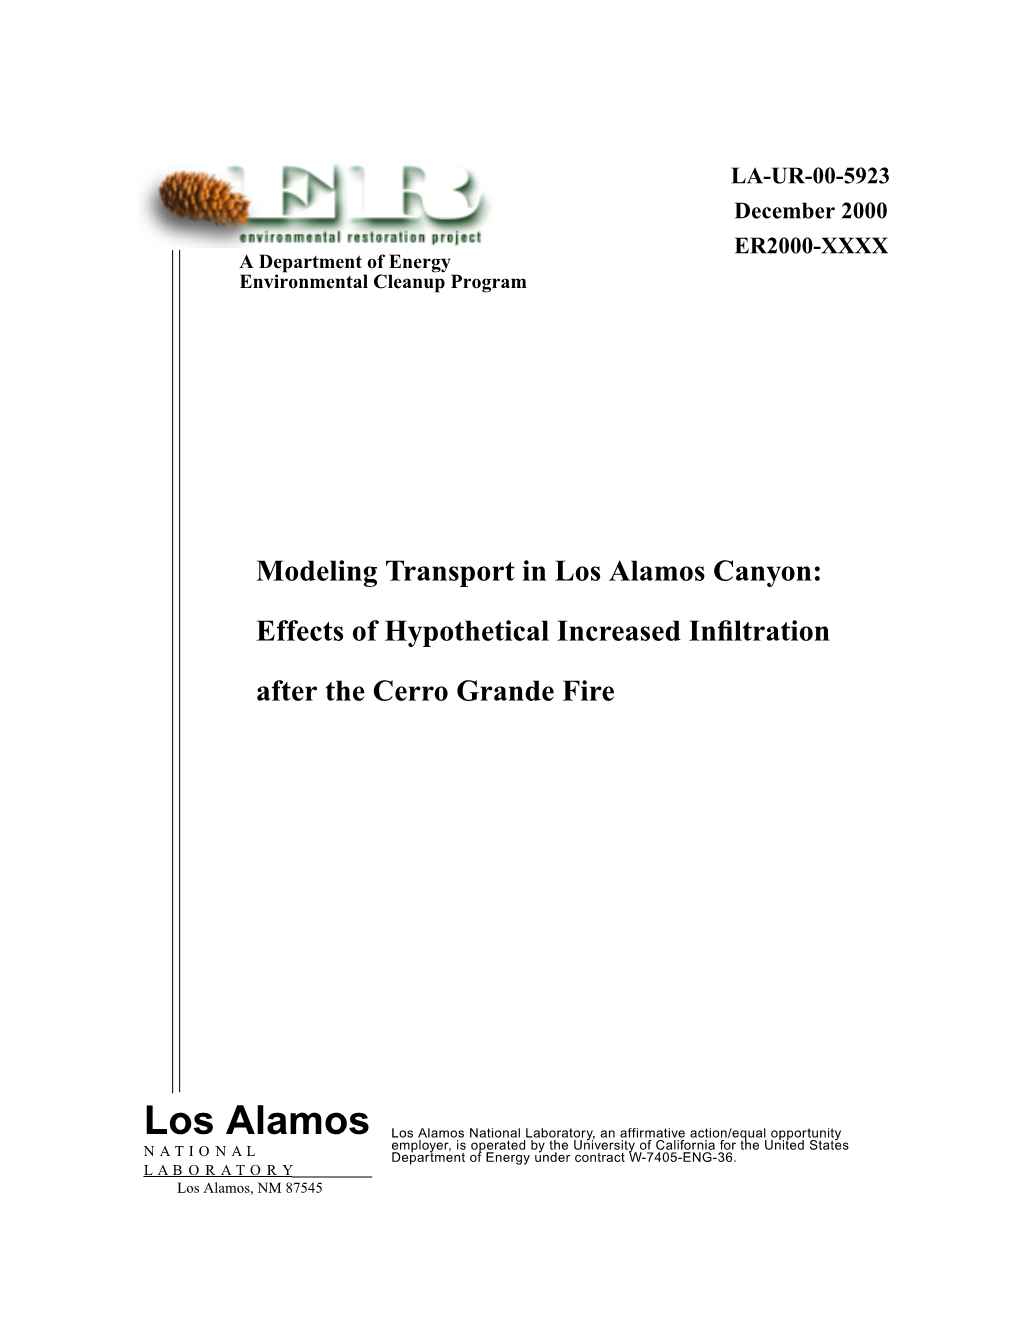 Modeling Transport in Los Alamos Canyon: Effects of Hypothetical Increased Inﬁltration After the Cerro Grande Fire